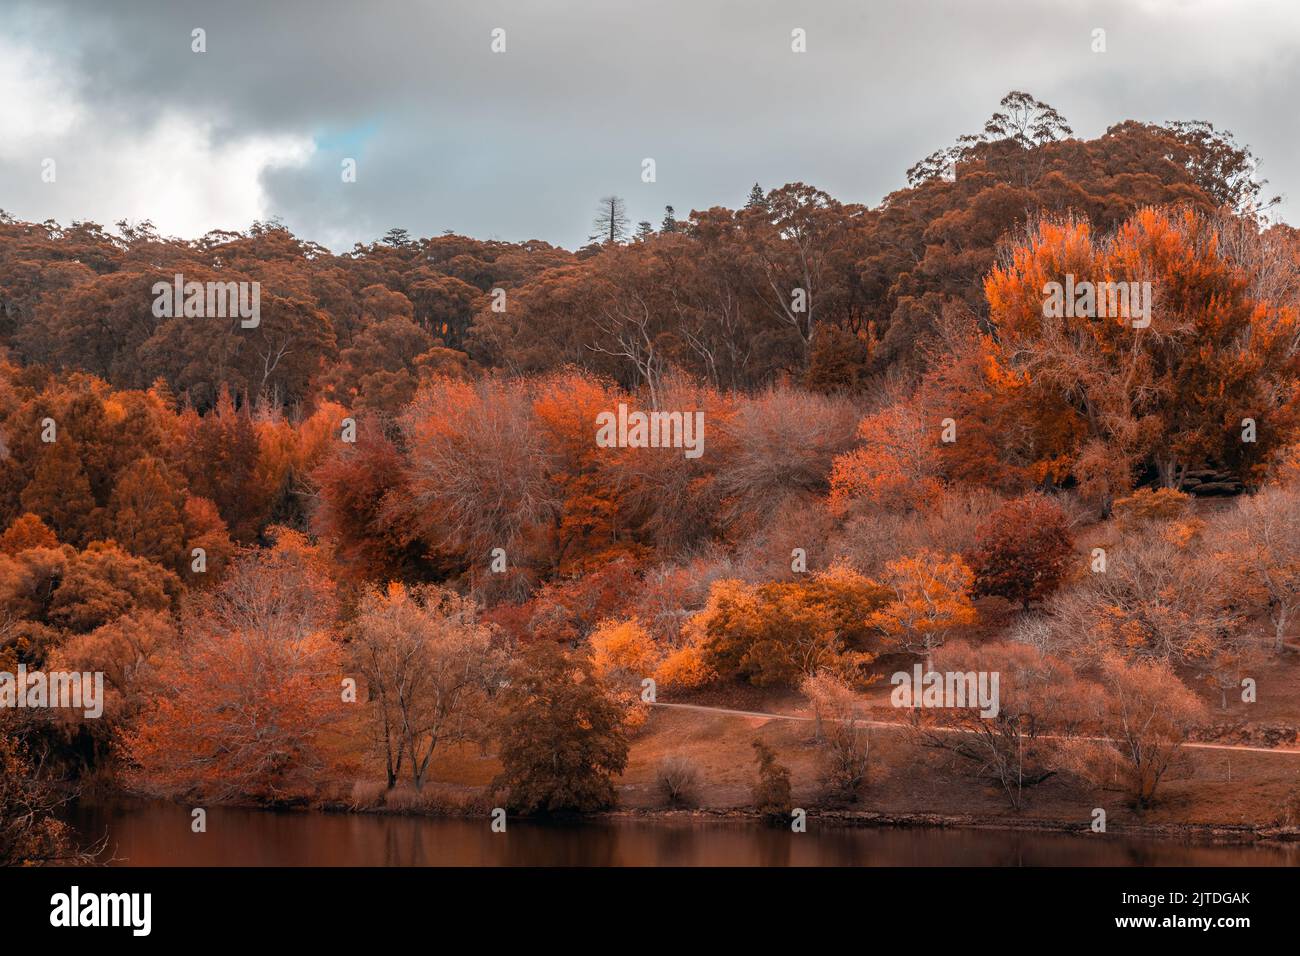 Mount Lofty Botanic Garden viewed across the pond on a day during autumn season. Colorisation effect applied. Stock Photo